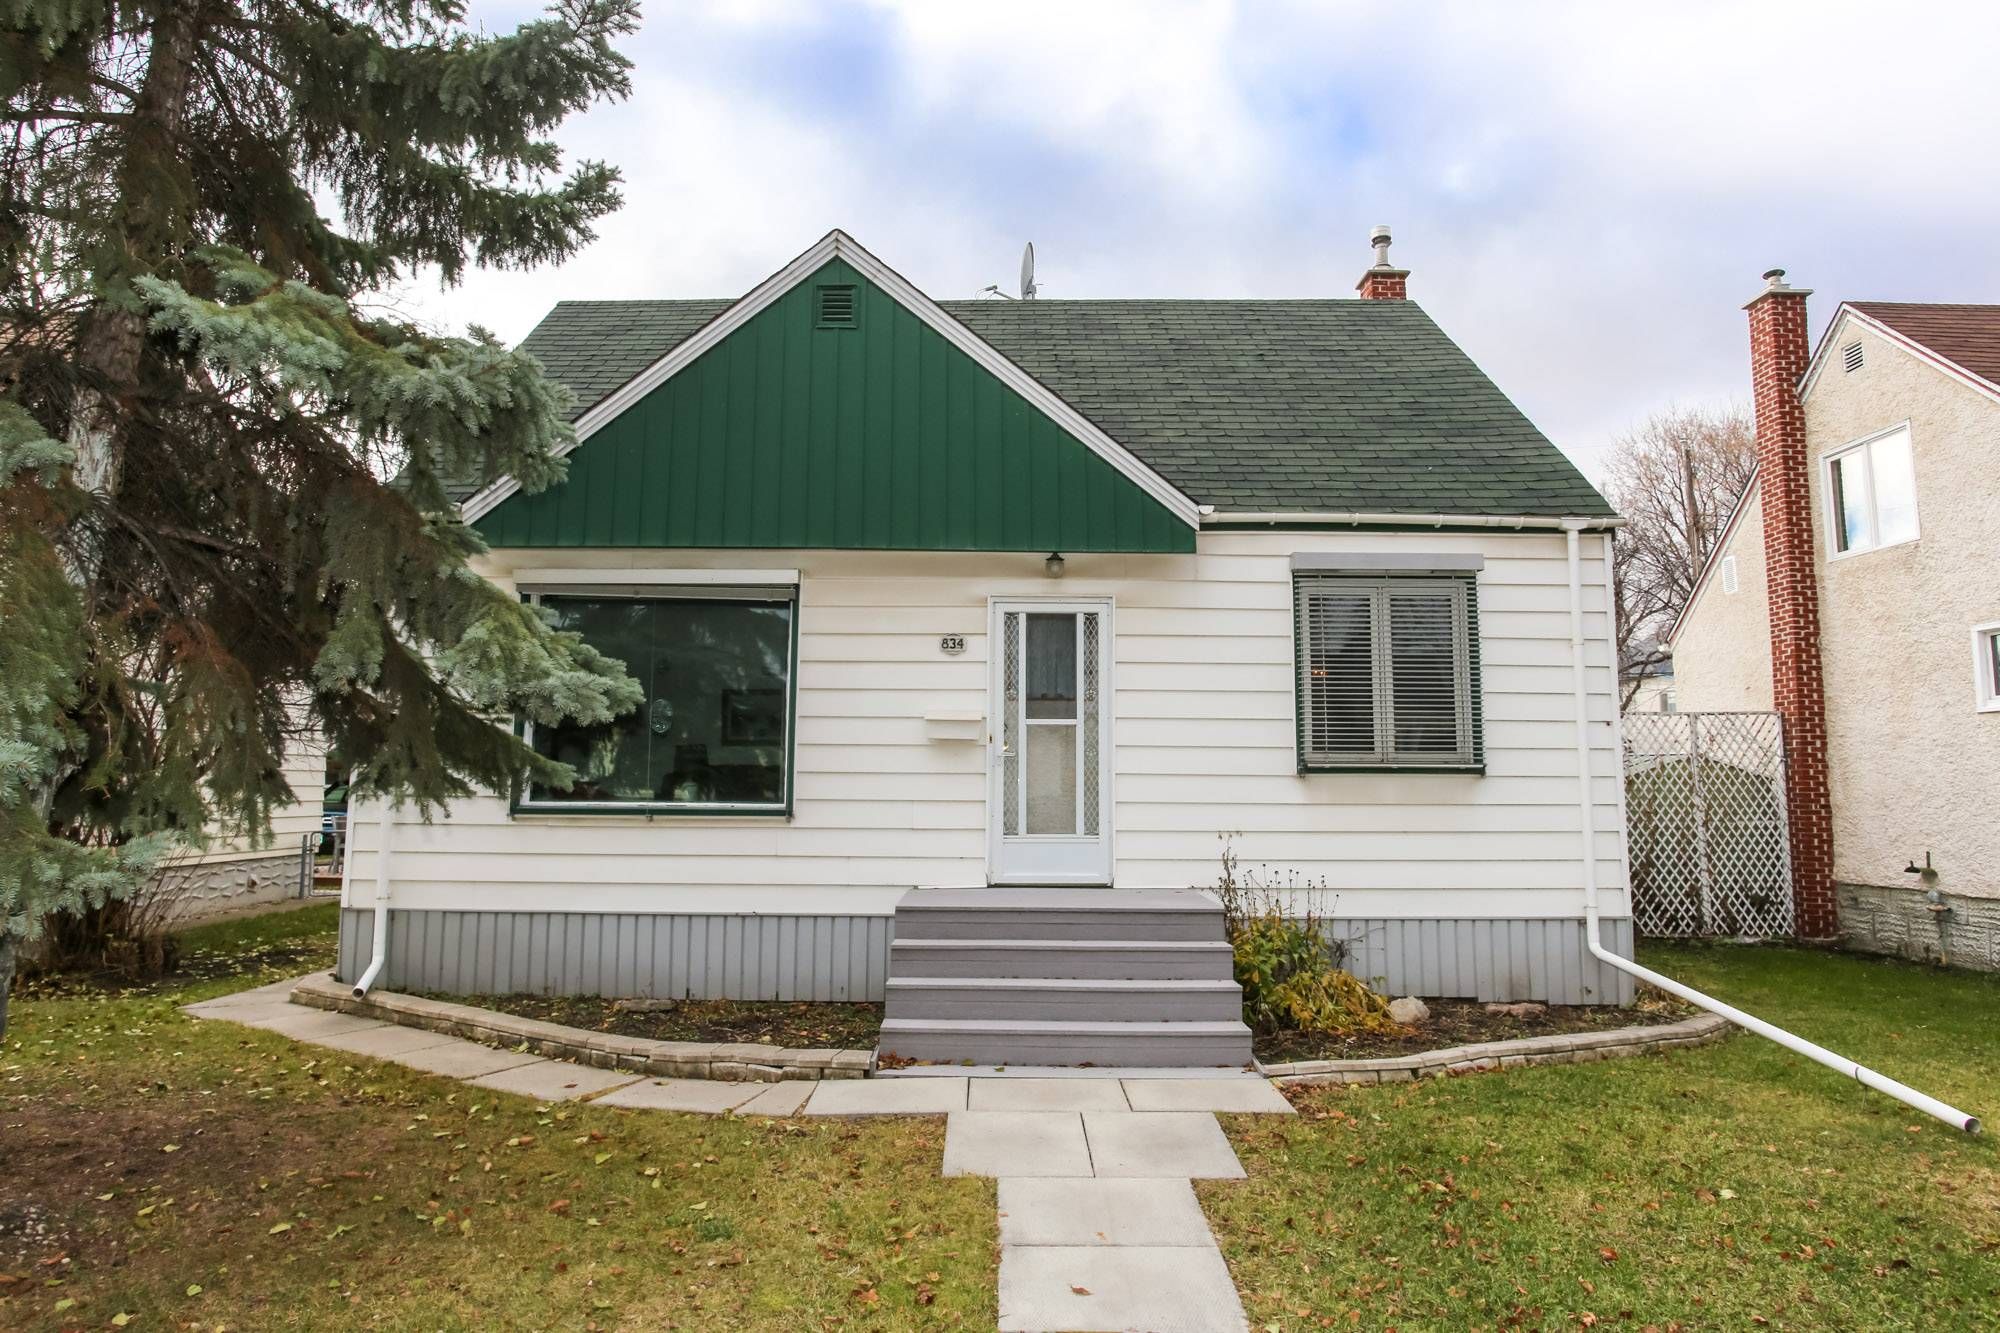 Photo 1: Photos: 834 Clifton Street in Winnipeg: West End Single Family Detached for sale (5C)  : MLS®# 1829695